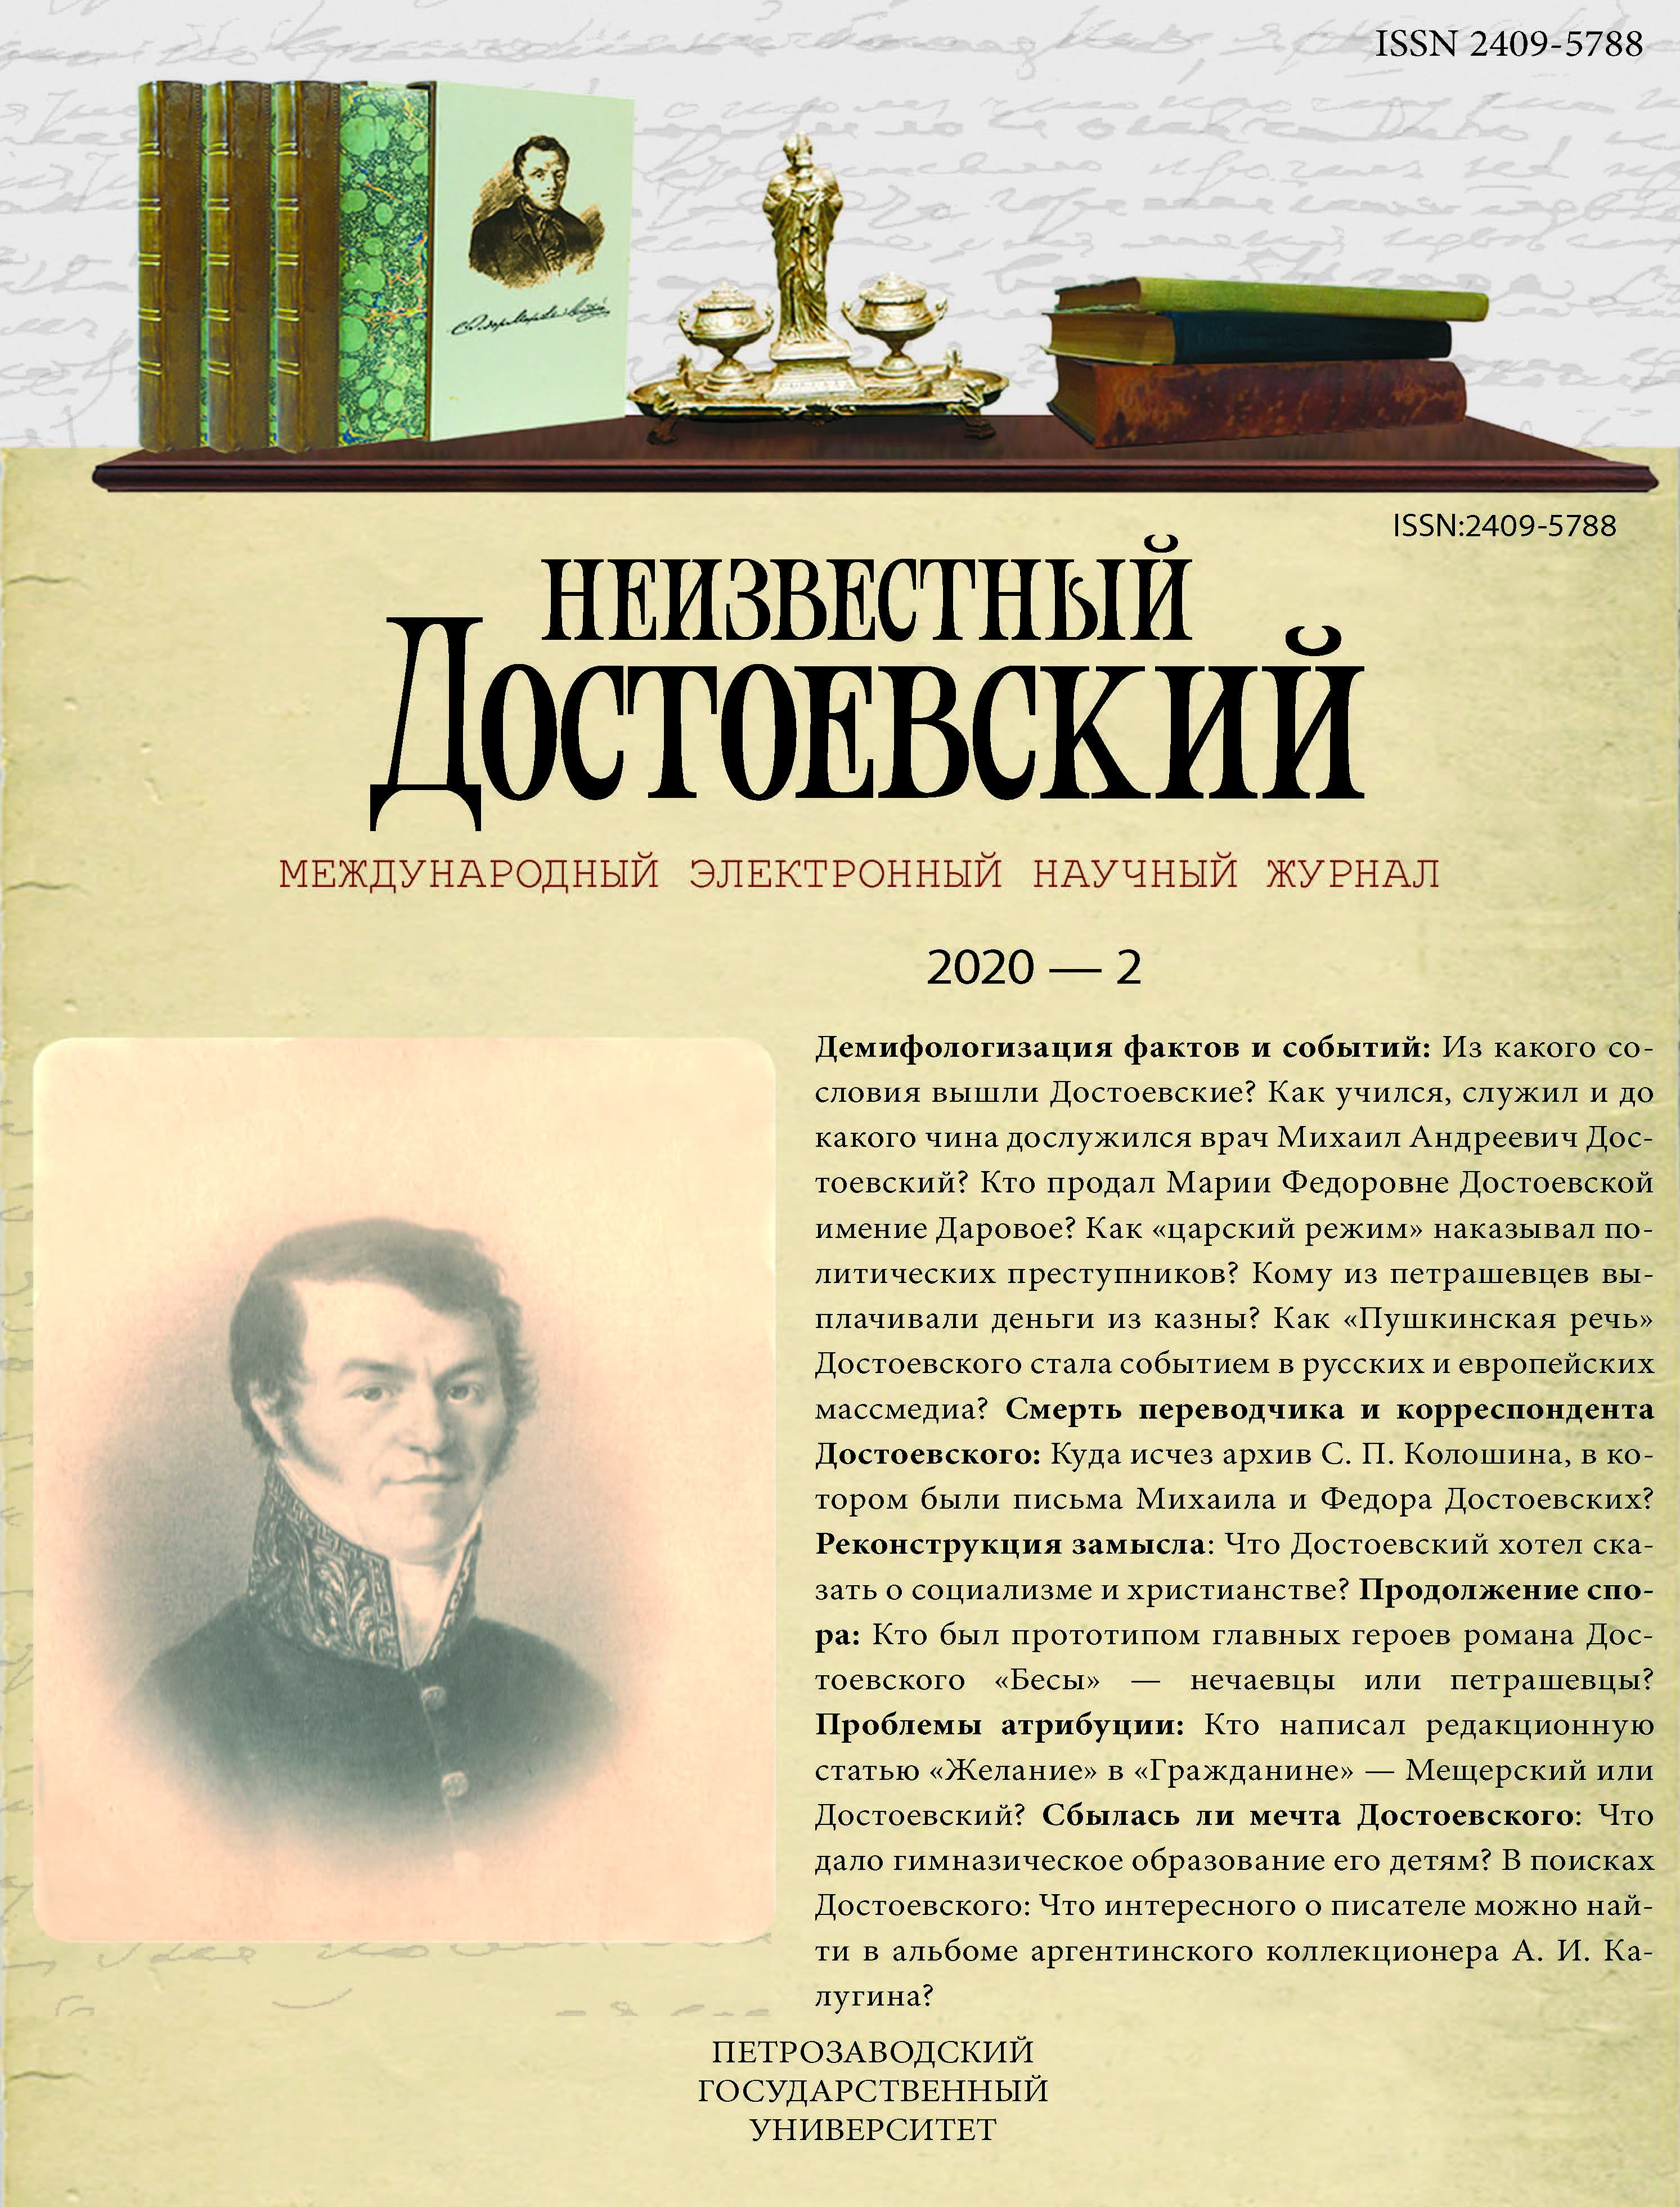 Pushkin Speech by Fedor Dostoevsky as an Event (Based on the Materials of the Manuscript Fund of the Vladimir Dahl State Museum of the History of Russian Literature) Cover Image